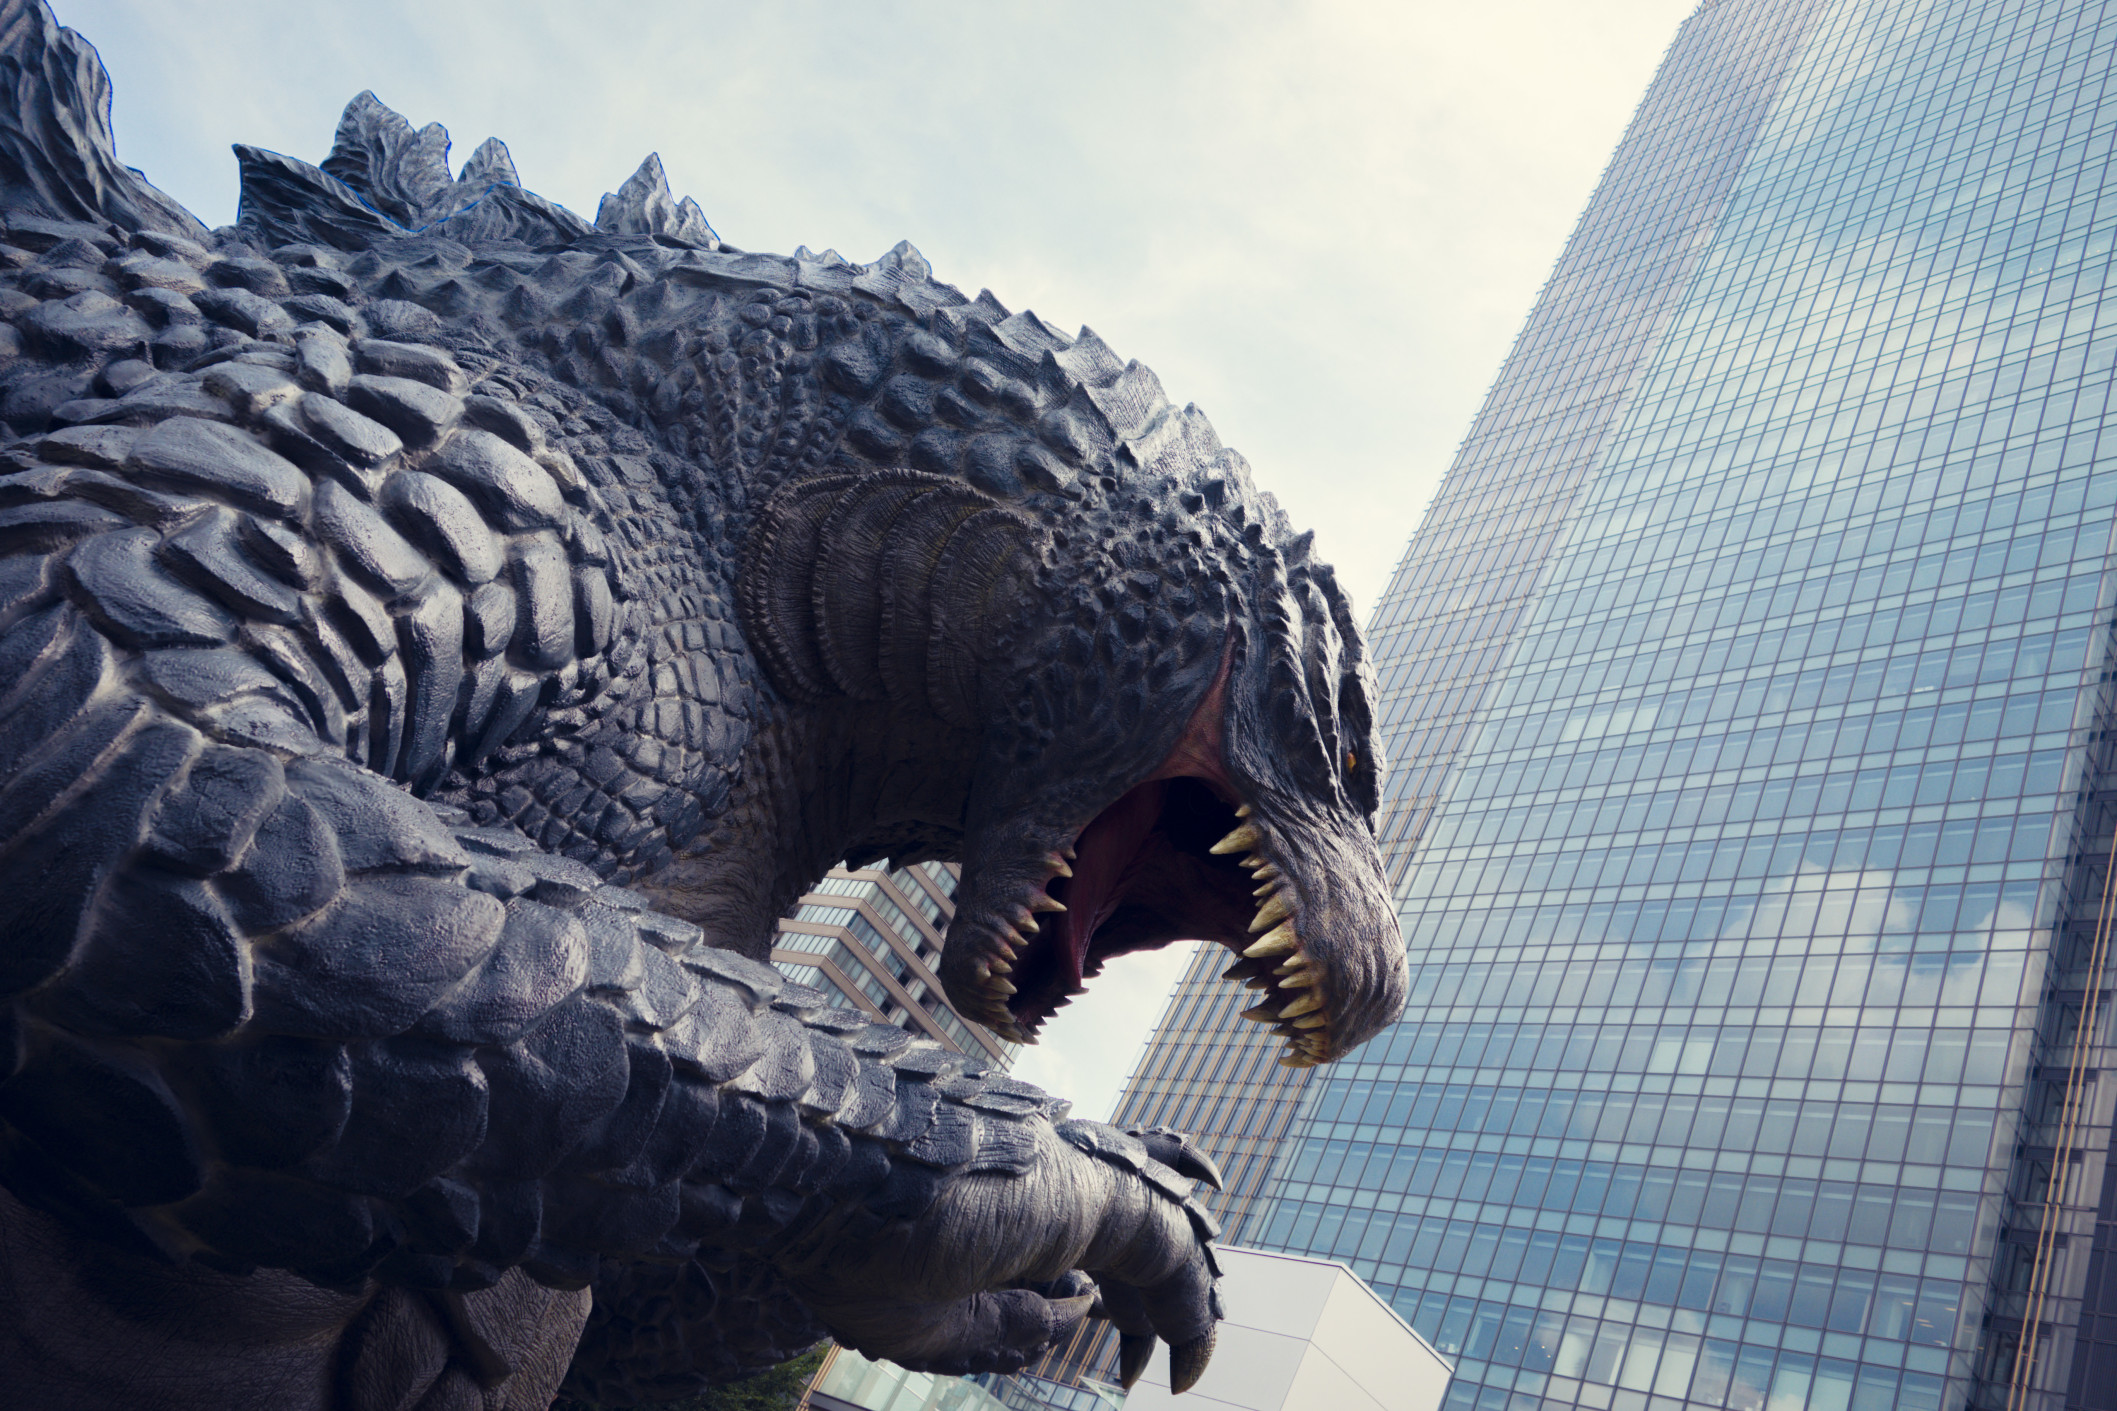 Attention monster fans: Godzilla Kong 2 shooting will start later this year